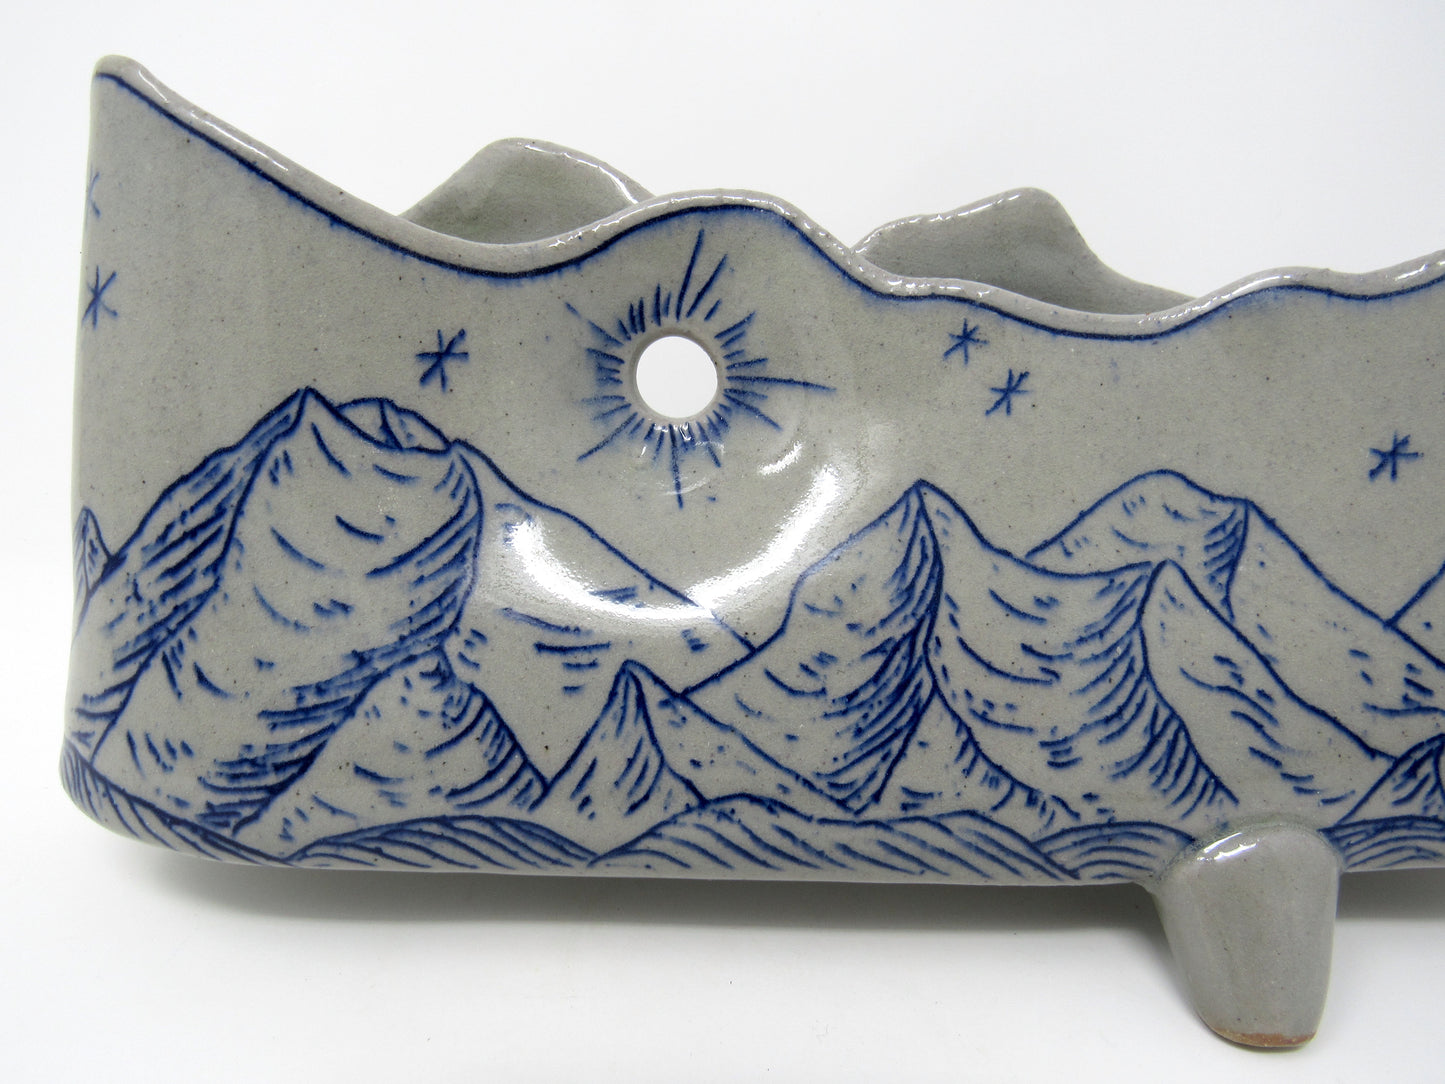 Mountain Landscape Vase with Feet in Blue and Gray